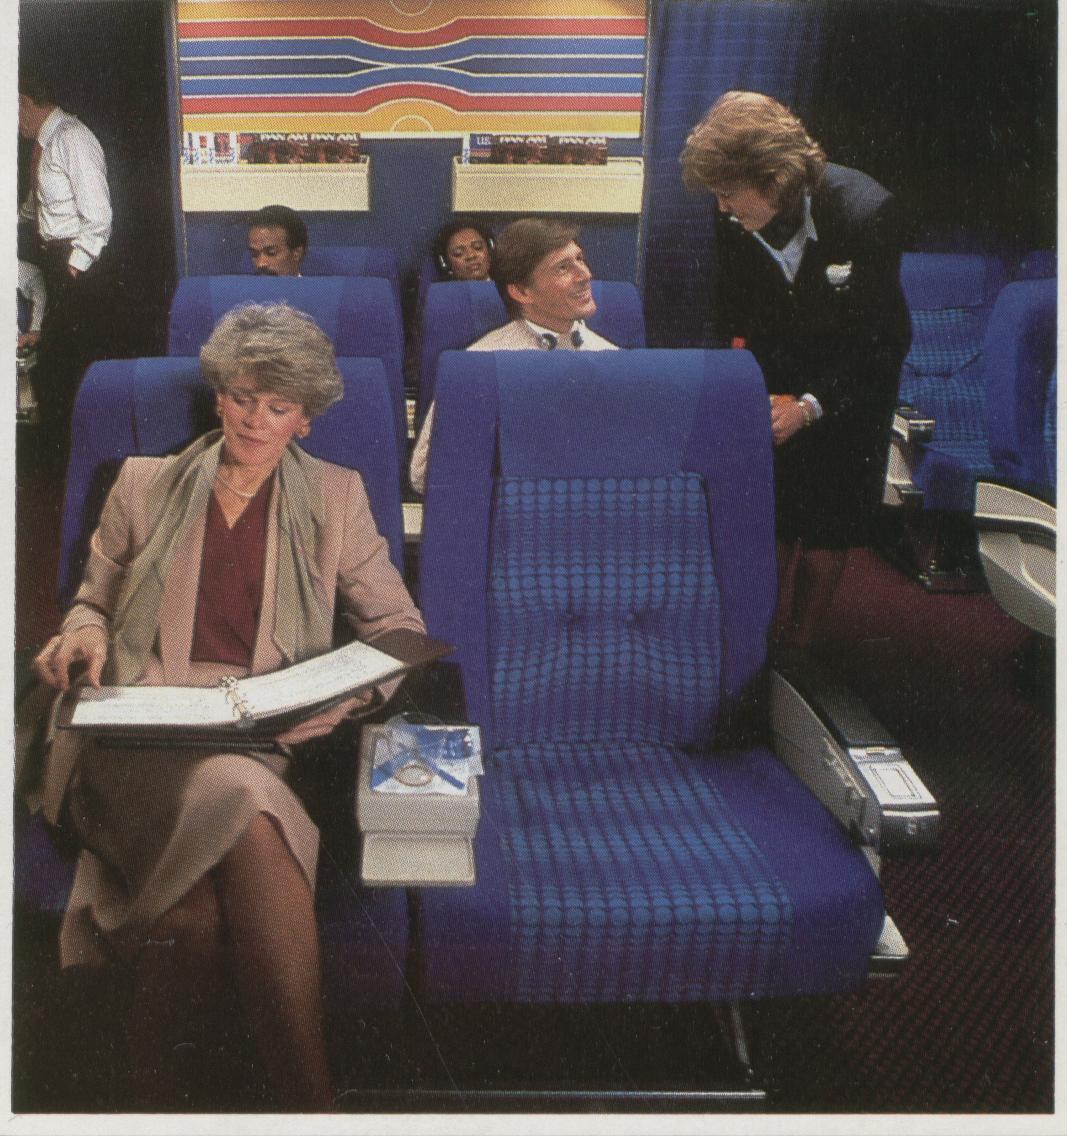 1985 When Pan Am converted the Clipper Class (Business Class) cabin from 8 across to 6 across seating bright blue seat covers were adopted as seen in this photo.  In 1988 Pan Am converted the business class  seat covers to a more demure herringbone pattern.